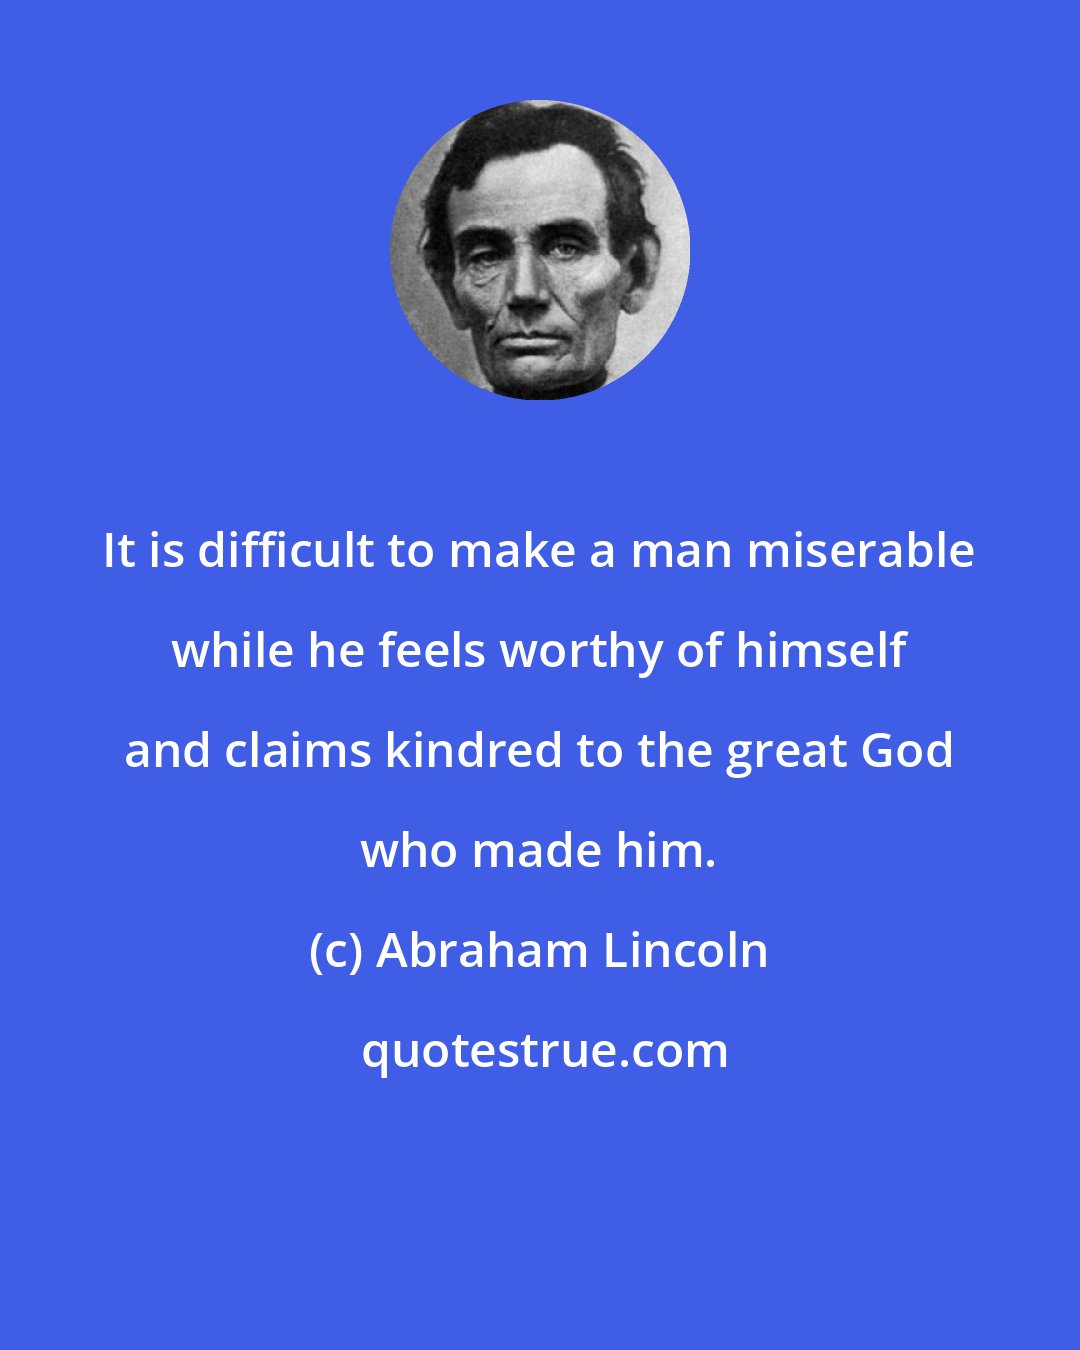 Abraham Lincoln: It is difficult to make a man miserable while he feels worthy of himself and claims kindred to the great God who made him.